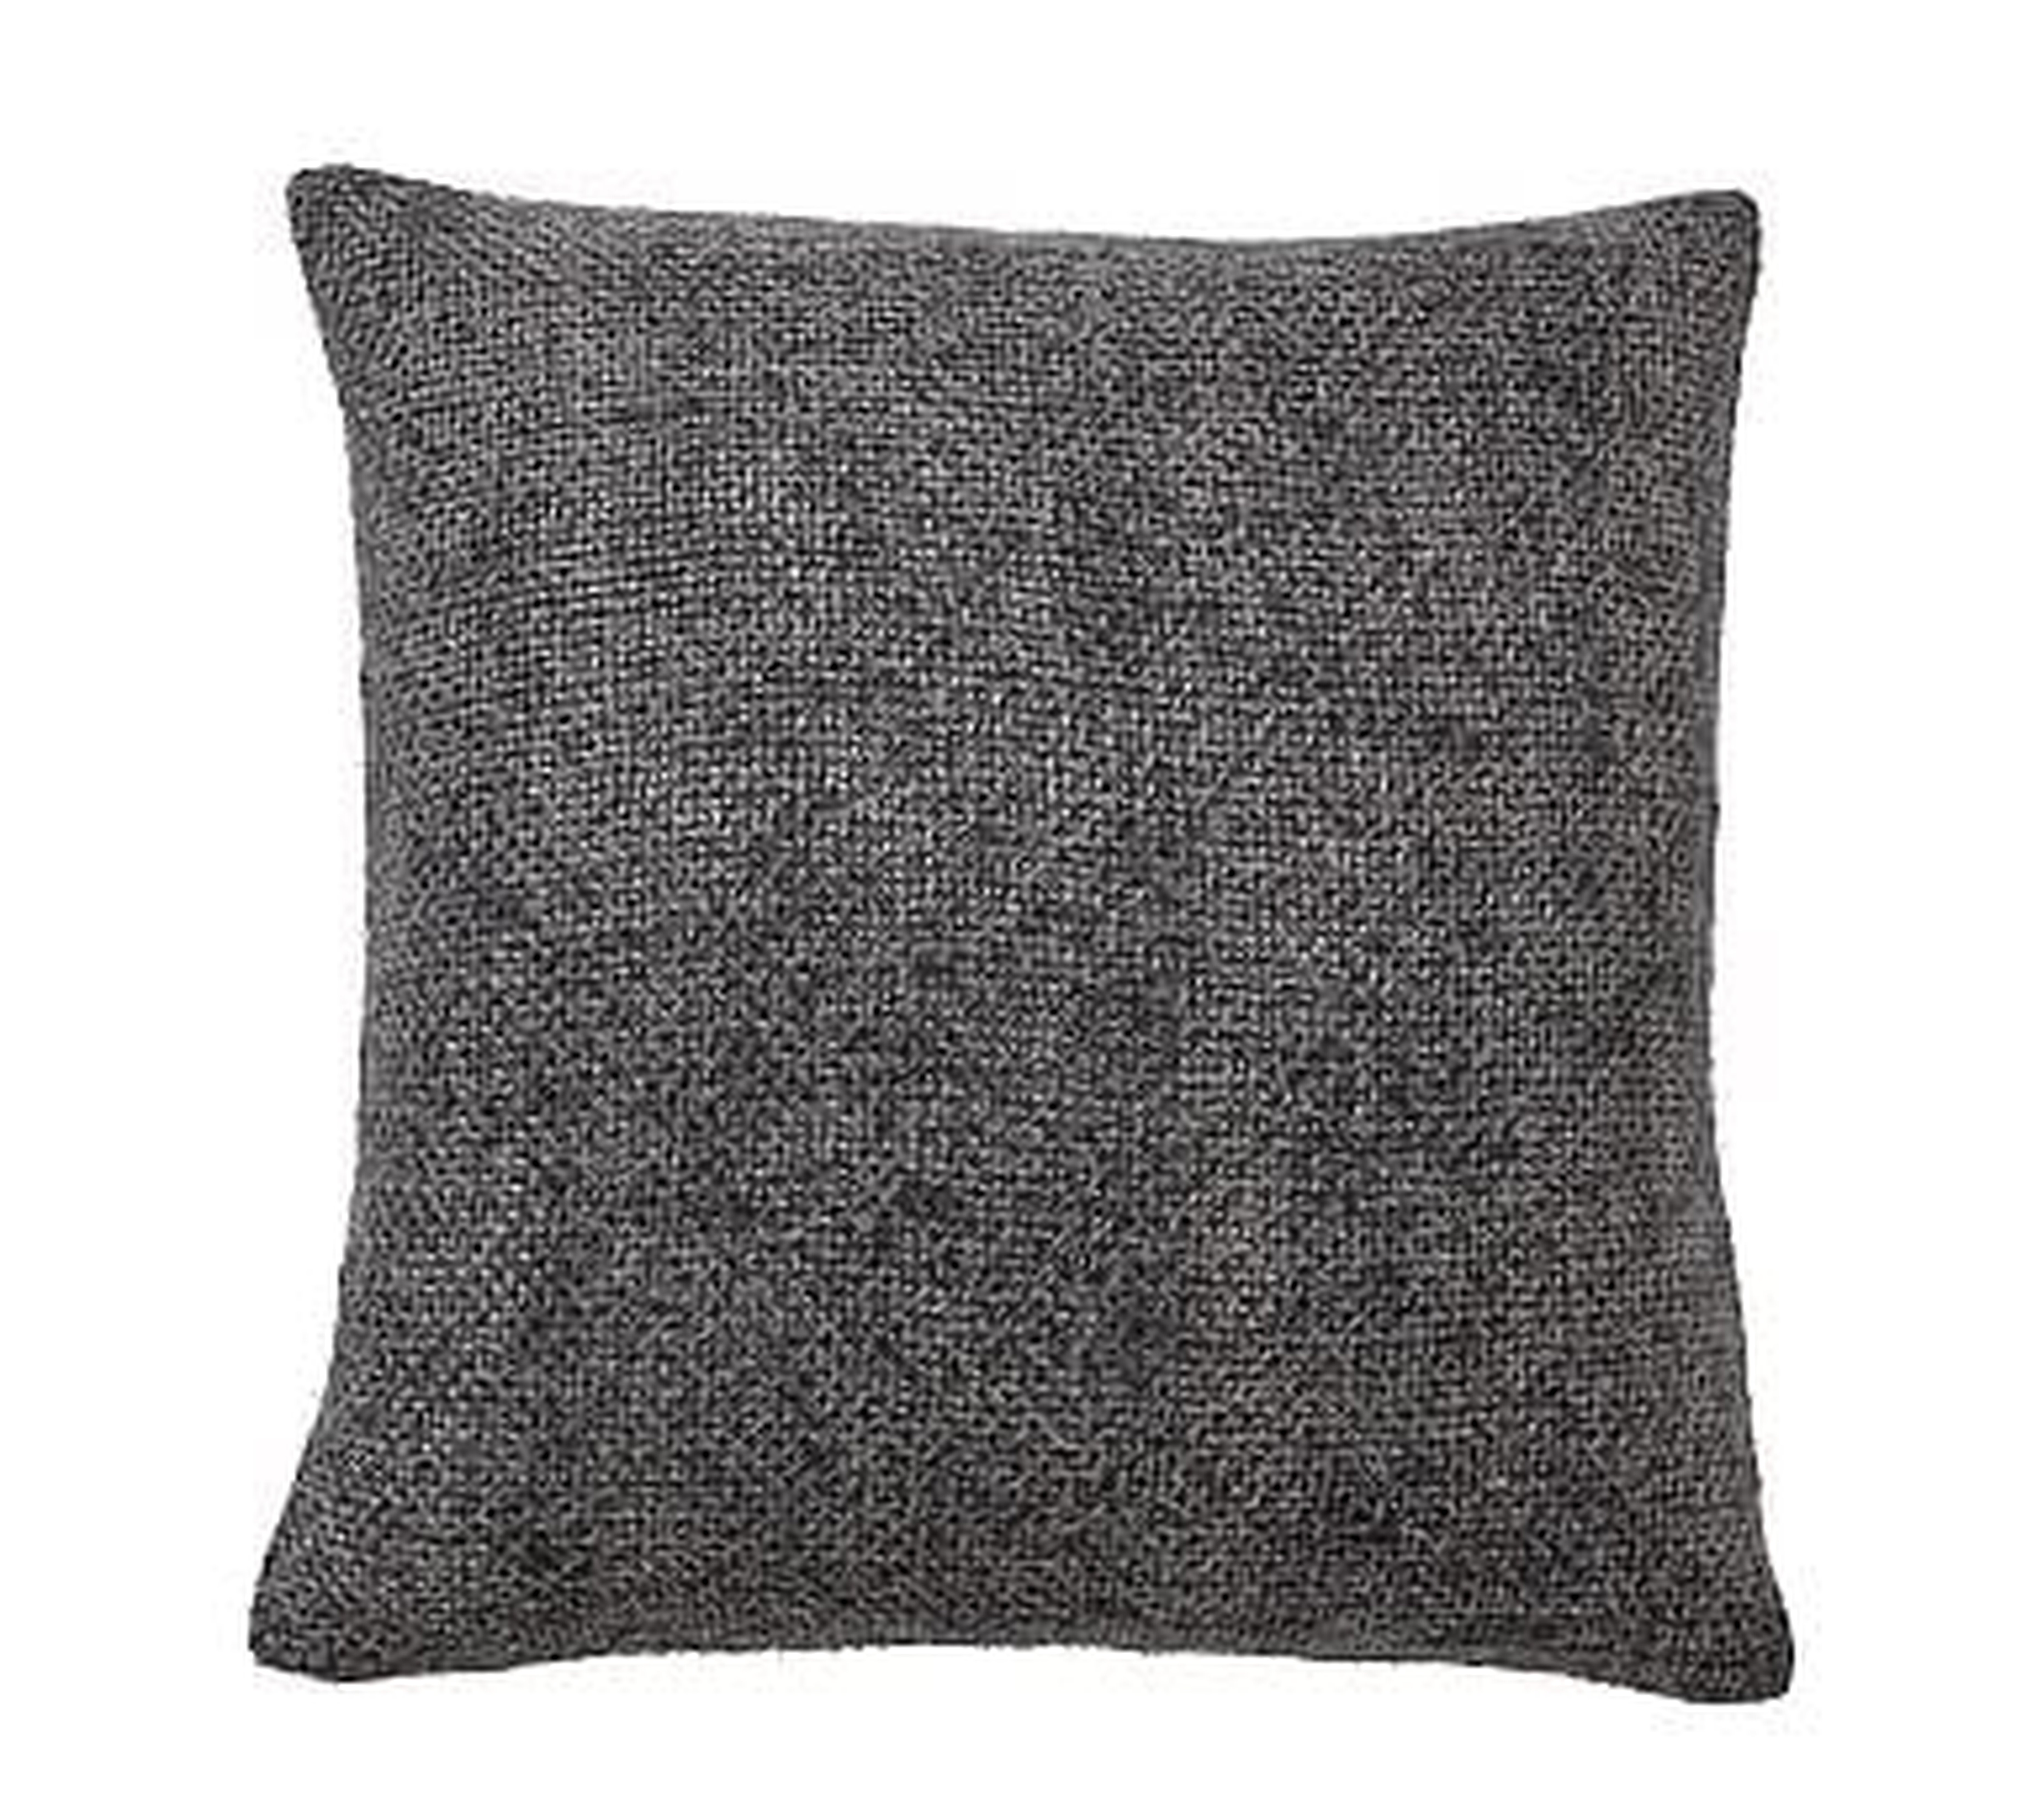 Faye Textured Linen Pillow Cover, 20", Charcoal - Pottery Barn